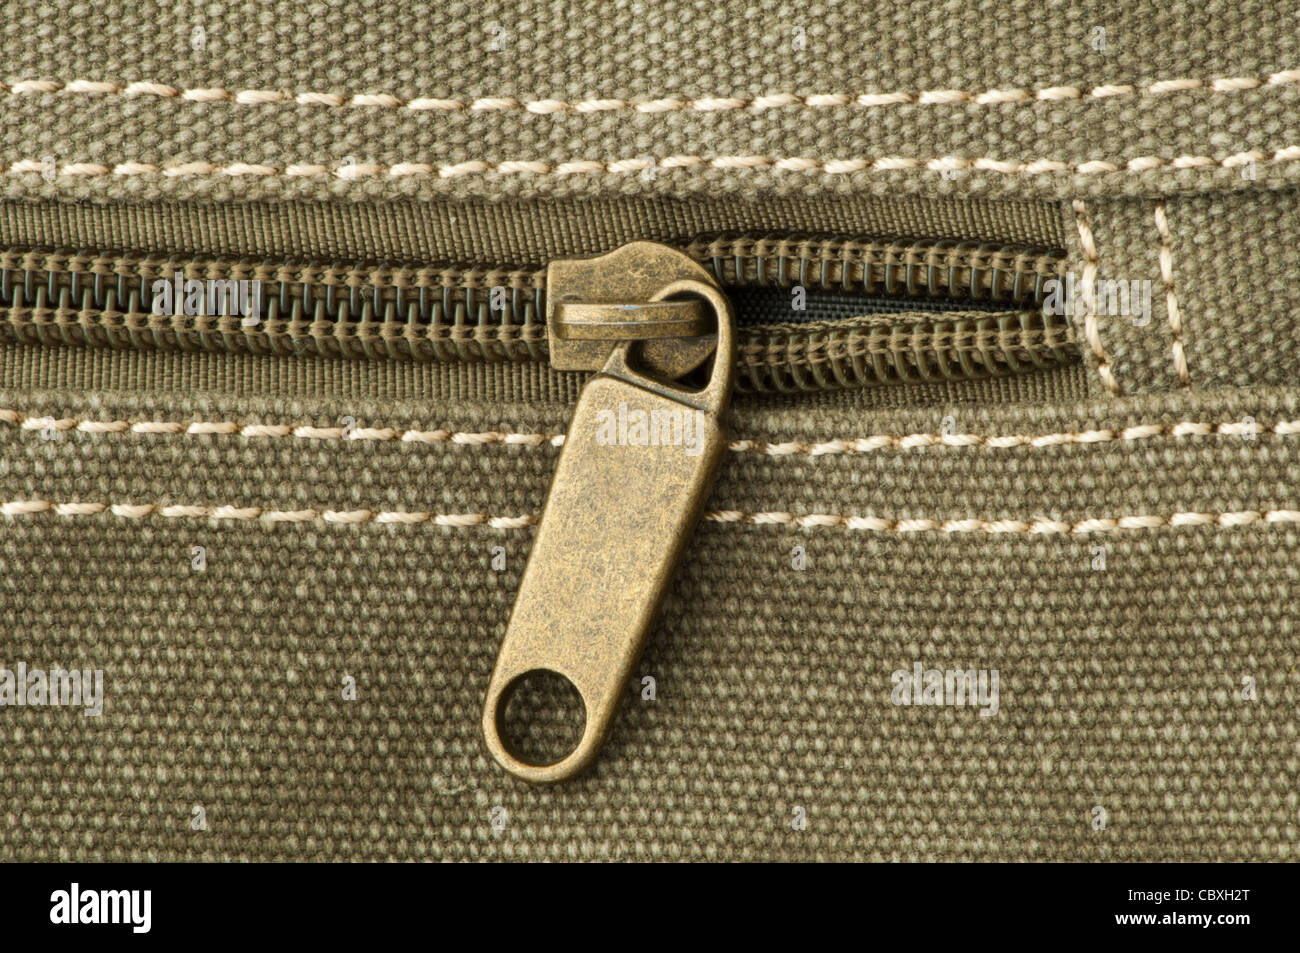 Beige zip on bag and sewing fabric Stock Photo